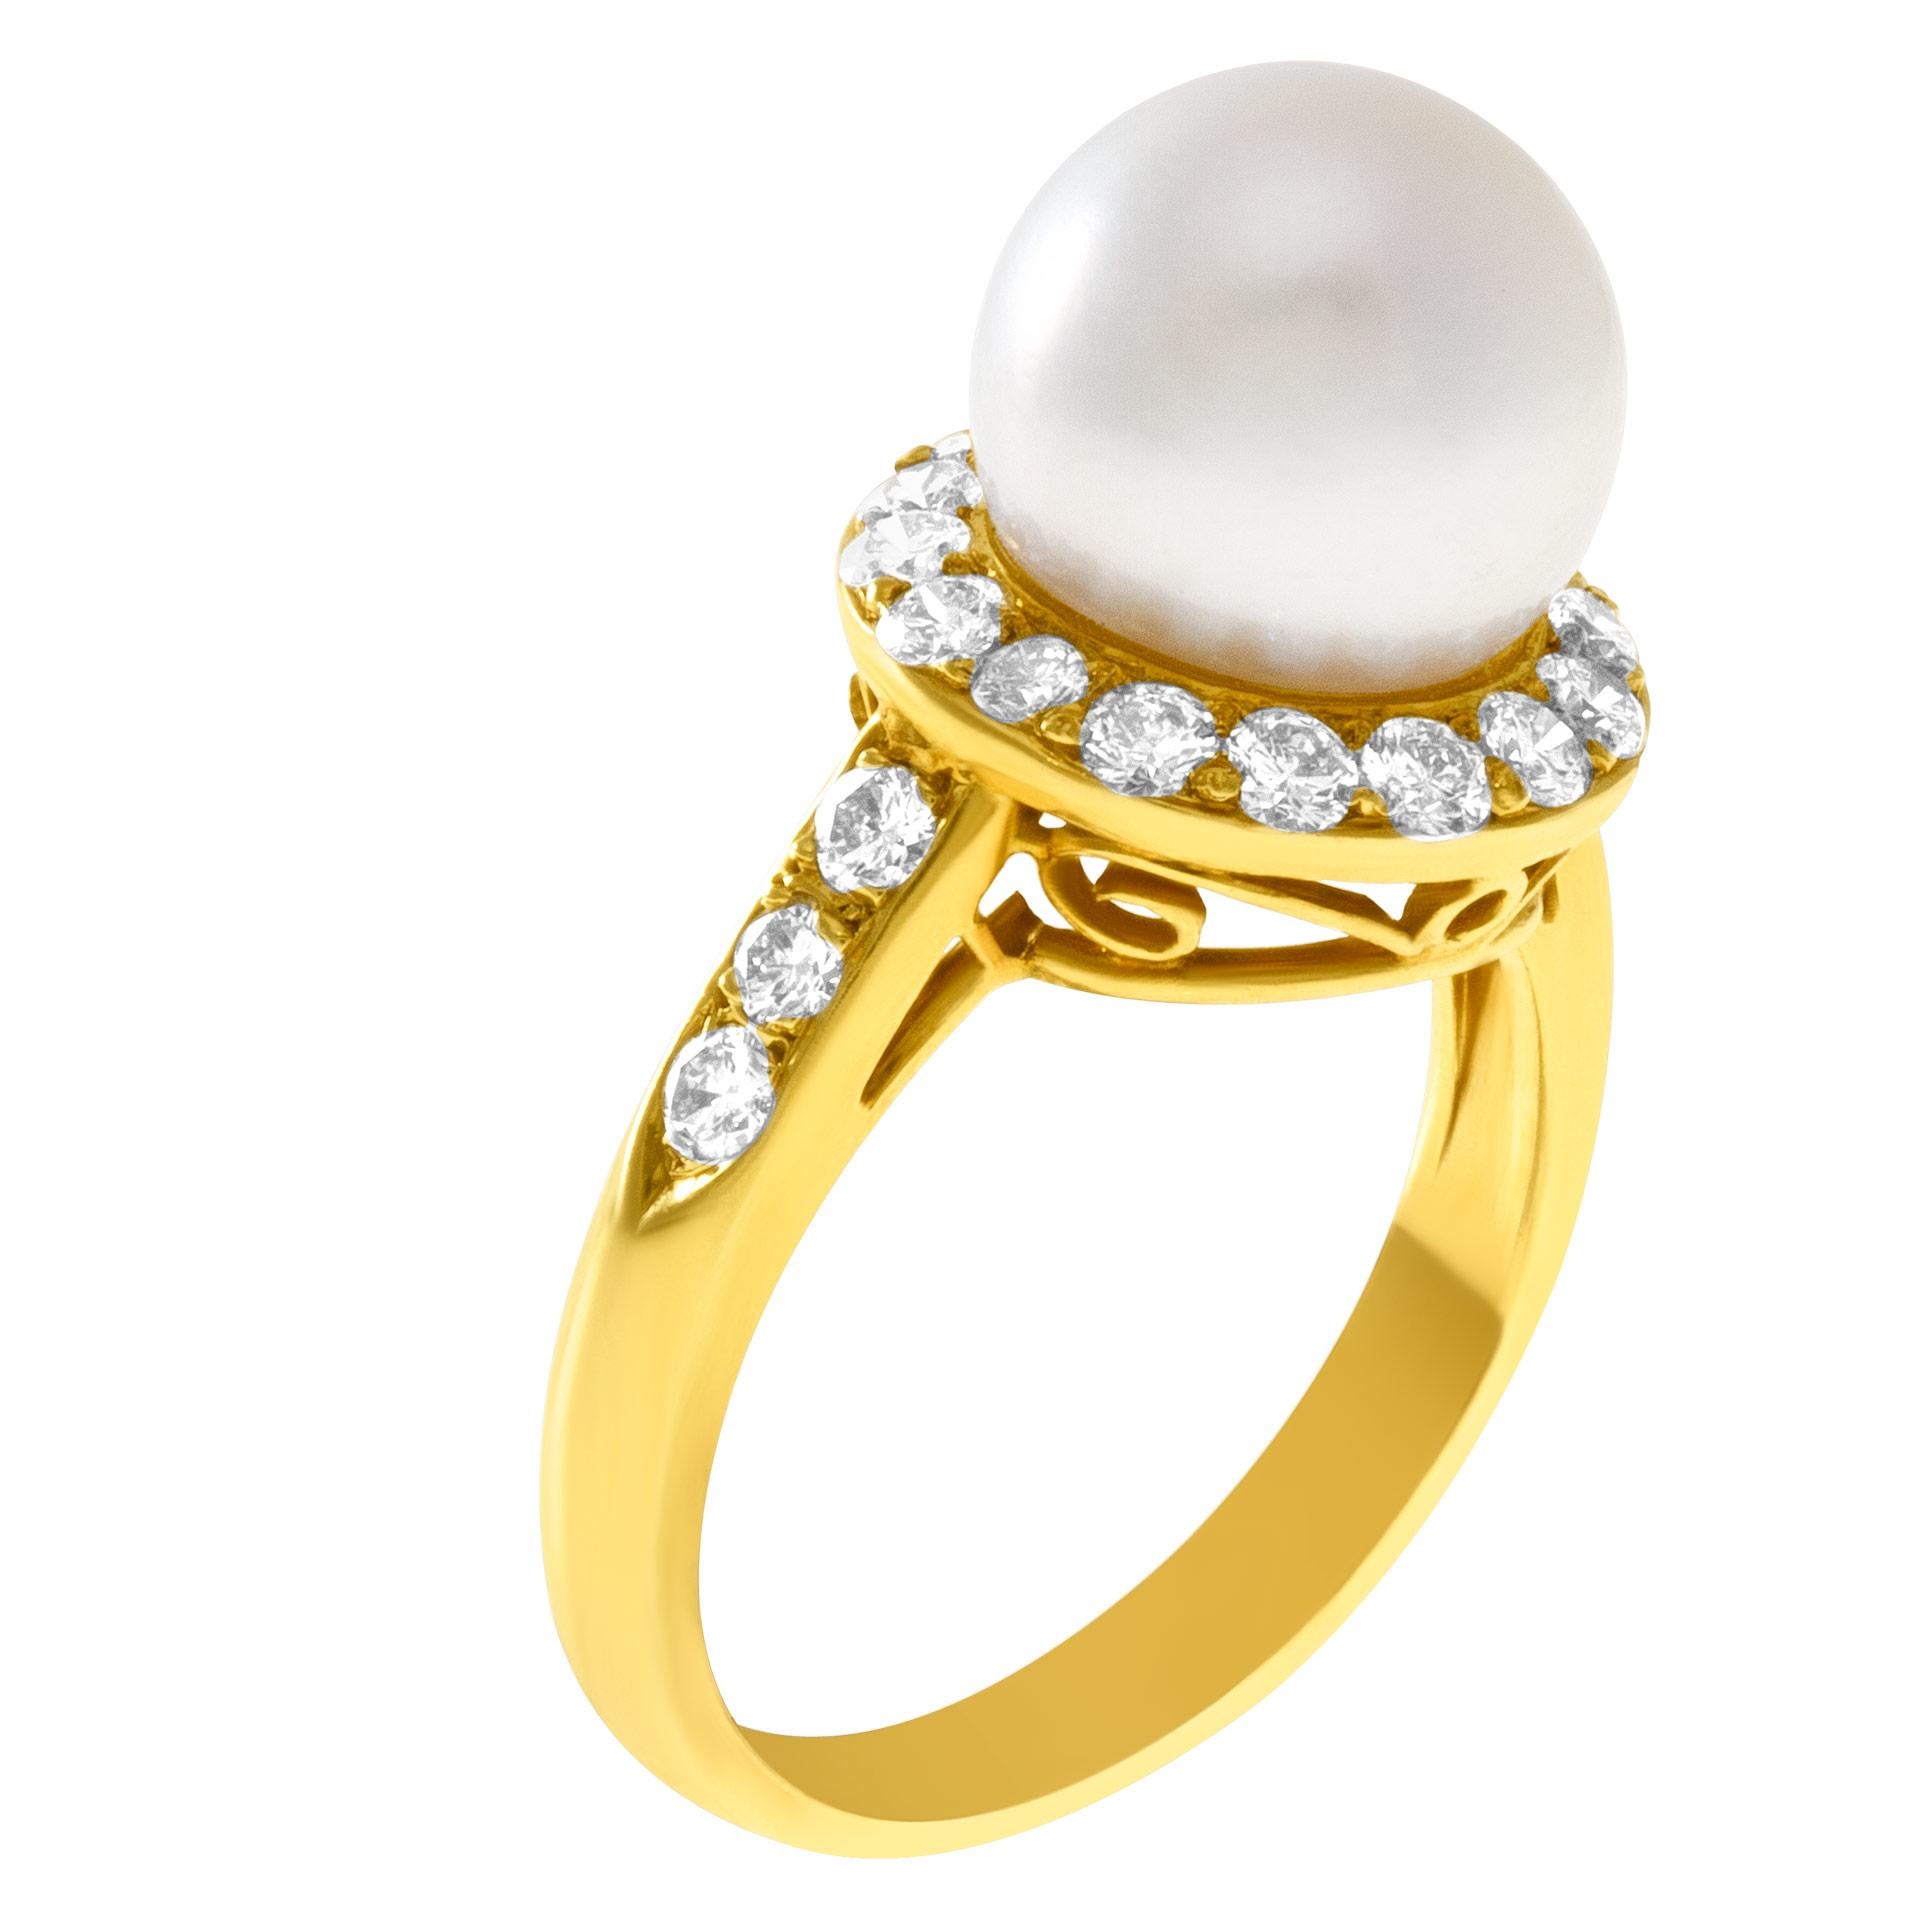 Sweet 9.5 mm pearl ring in 18k with diamond accents approx 1.32 carats. Width at head: 12.3mm, width at shank: 2.4mm. Size 6.  This Diamond/pearl ring is currently size 6 and some items can be sized up or down, please ask! It weighs 4.1 pennyweights